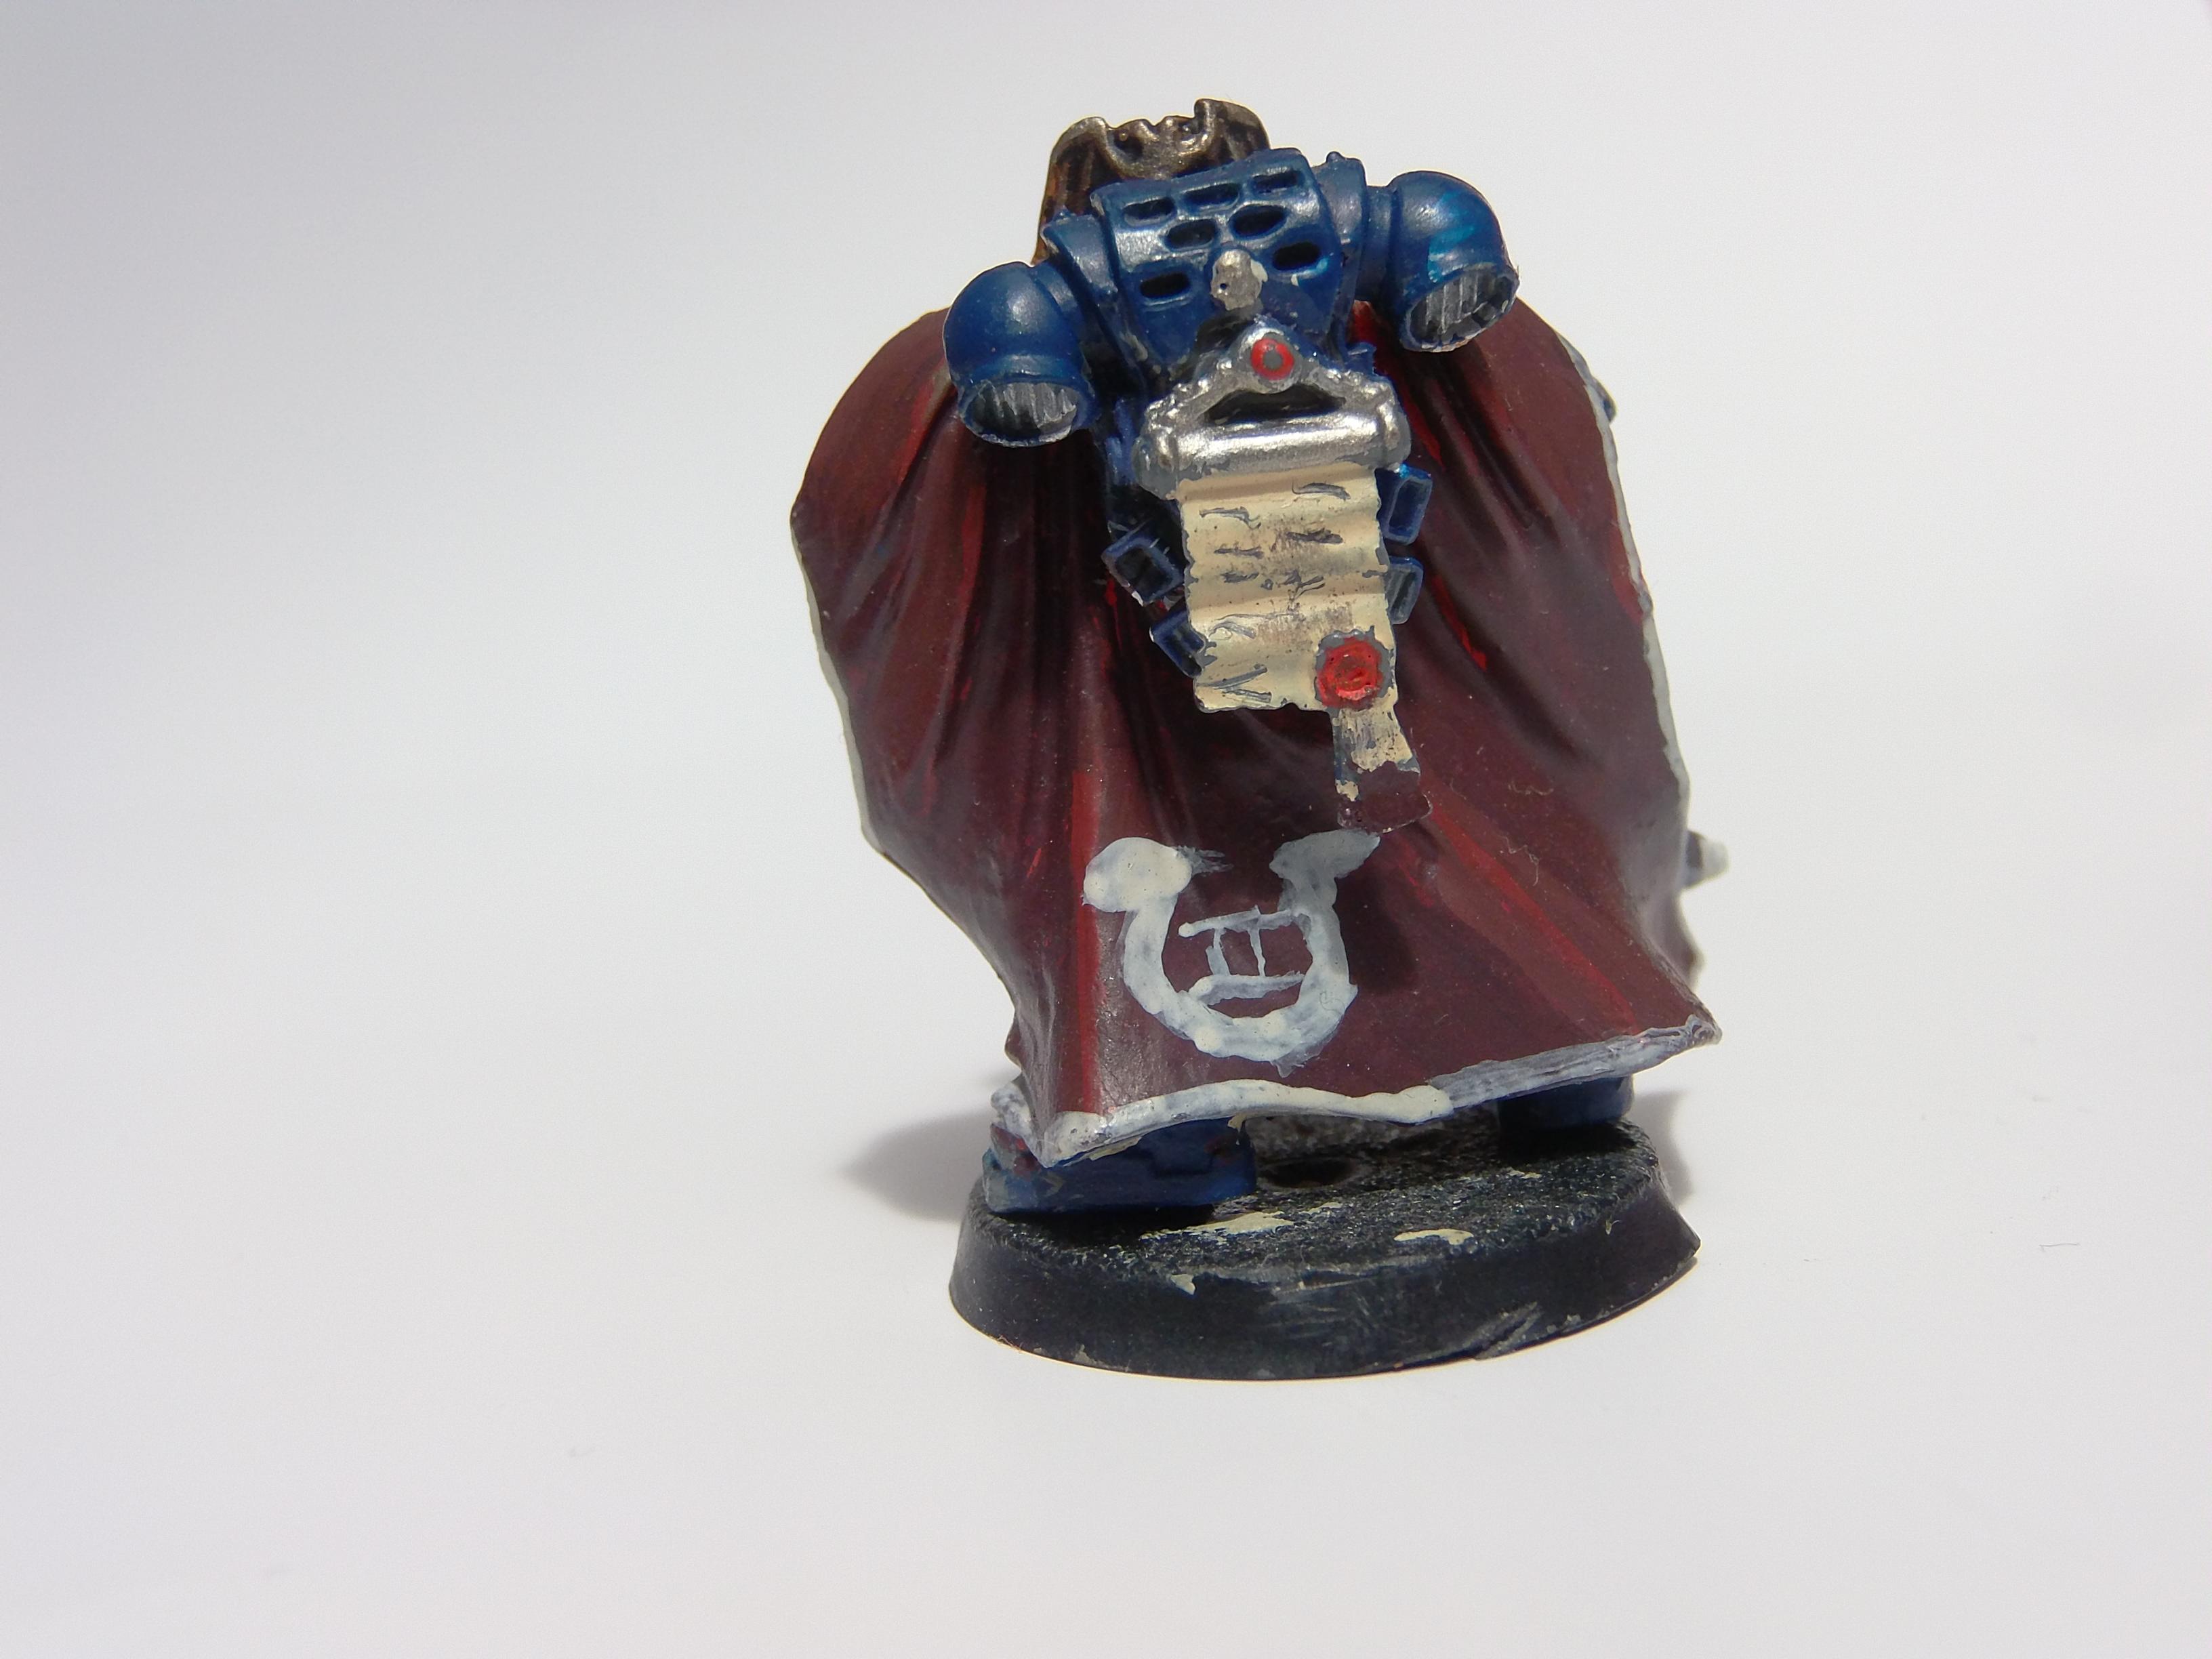 Conversion, Kit Bashed, Scratch Build, Space Marines, Ultramarines, Warhammer 40,000